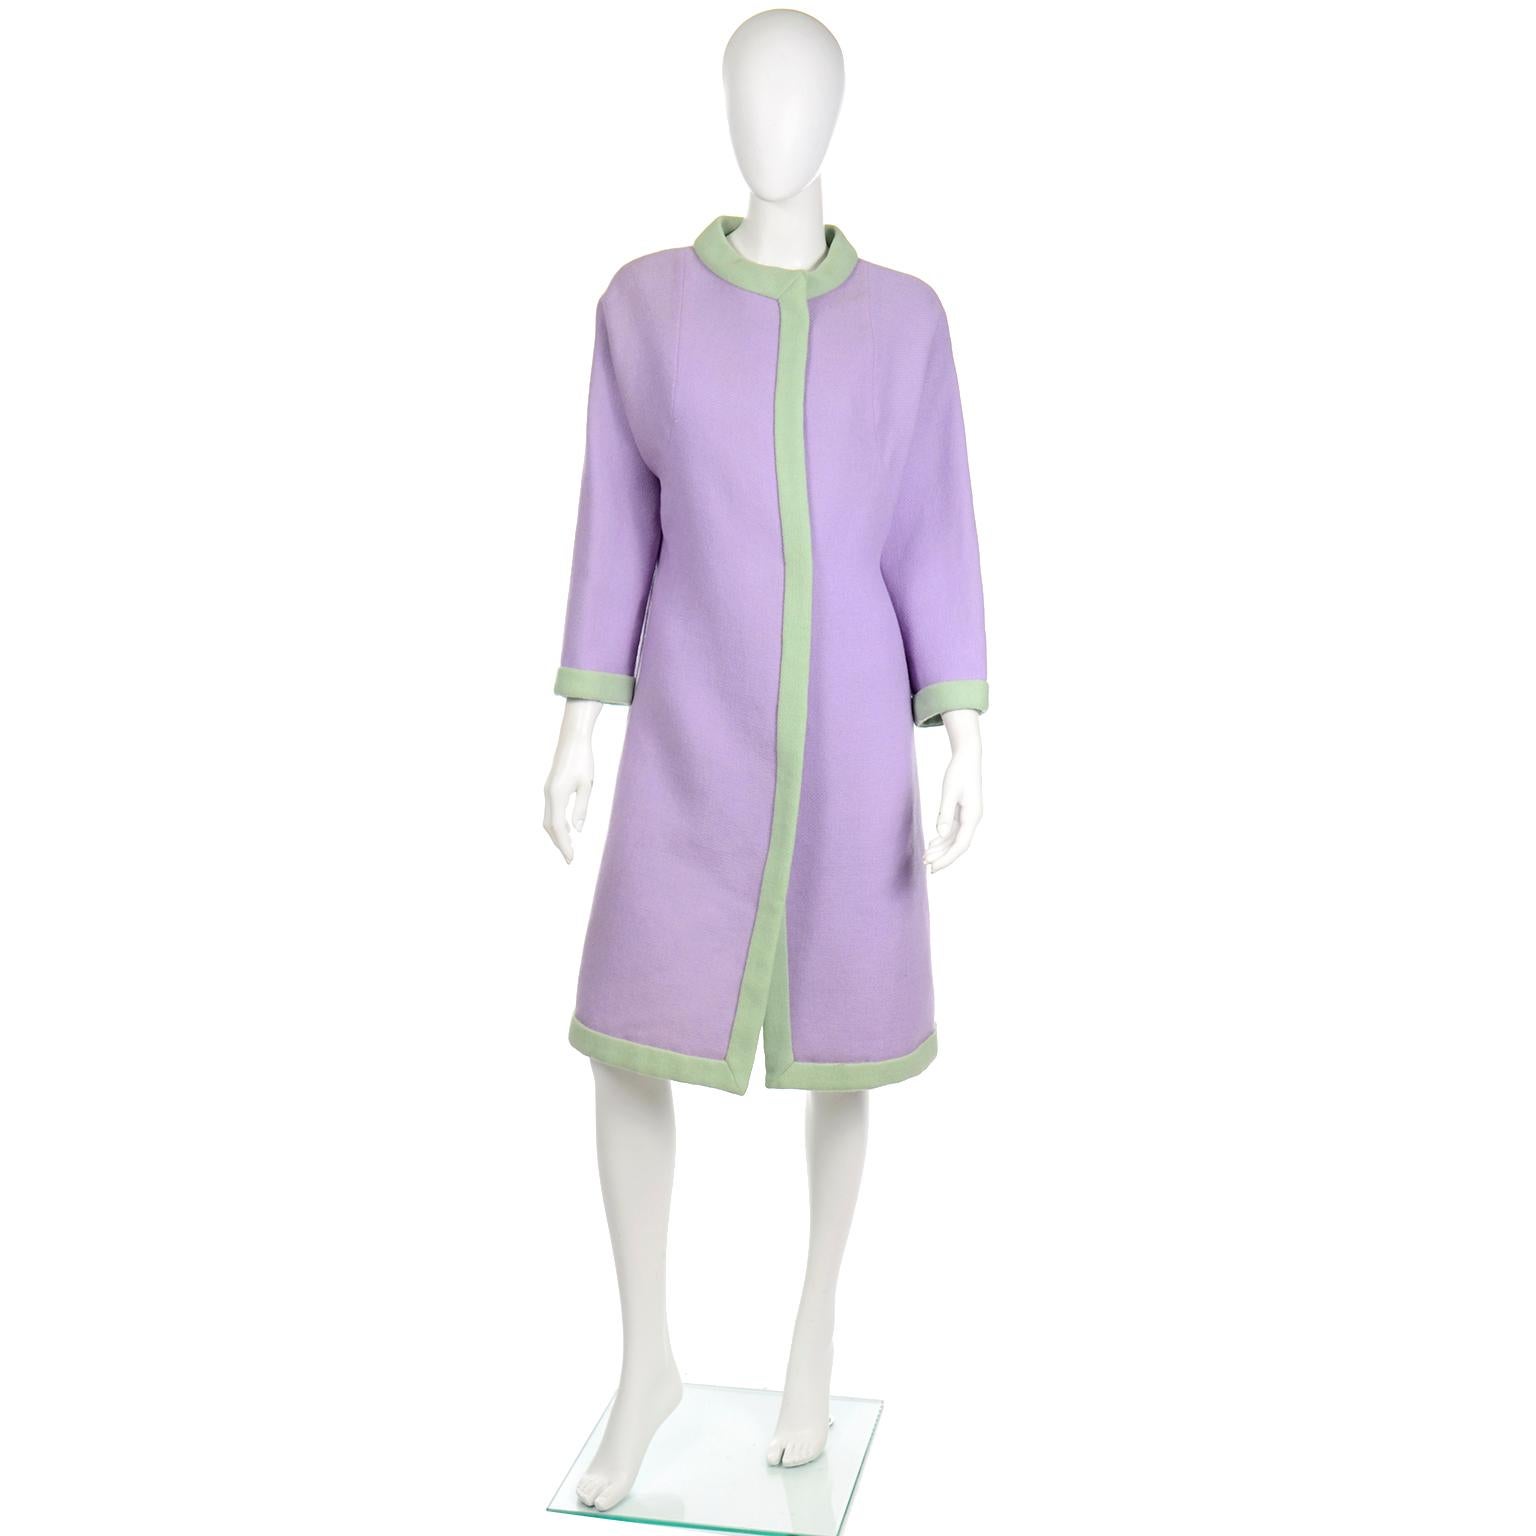 This rare vintage coat was designed by Oscar de la Renta for Jane Derby and sold at Saks Fifth Avenue in the 1960's. We always love Oscar de la Renta vintage pieces and this one is so special! This fabulous vintage coat is in a pretty lavender